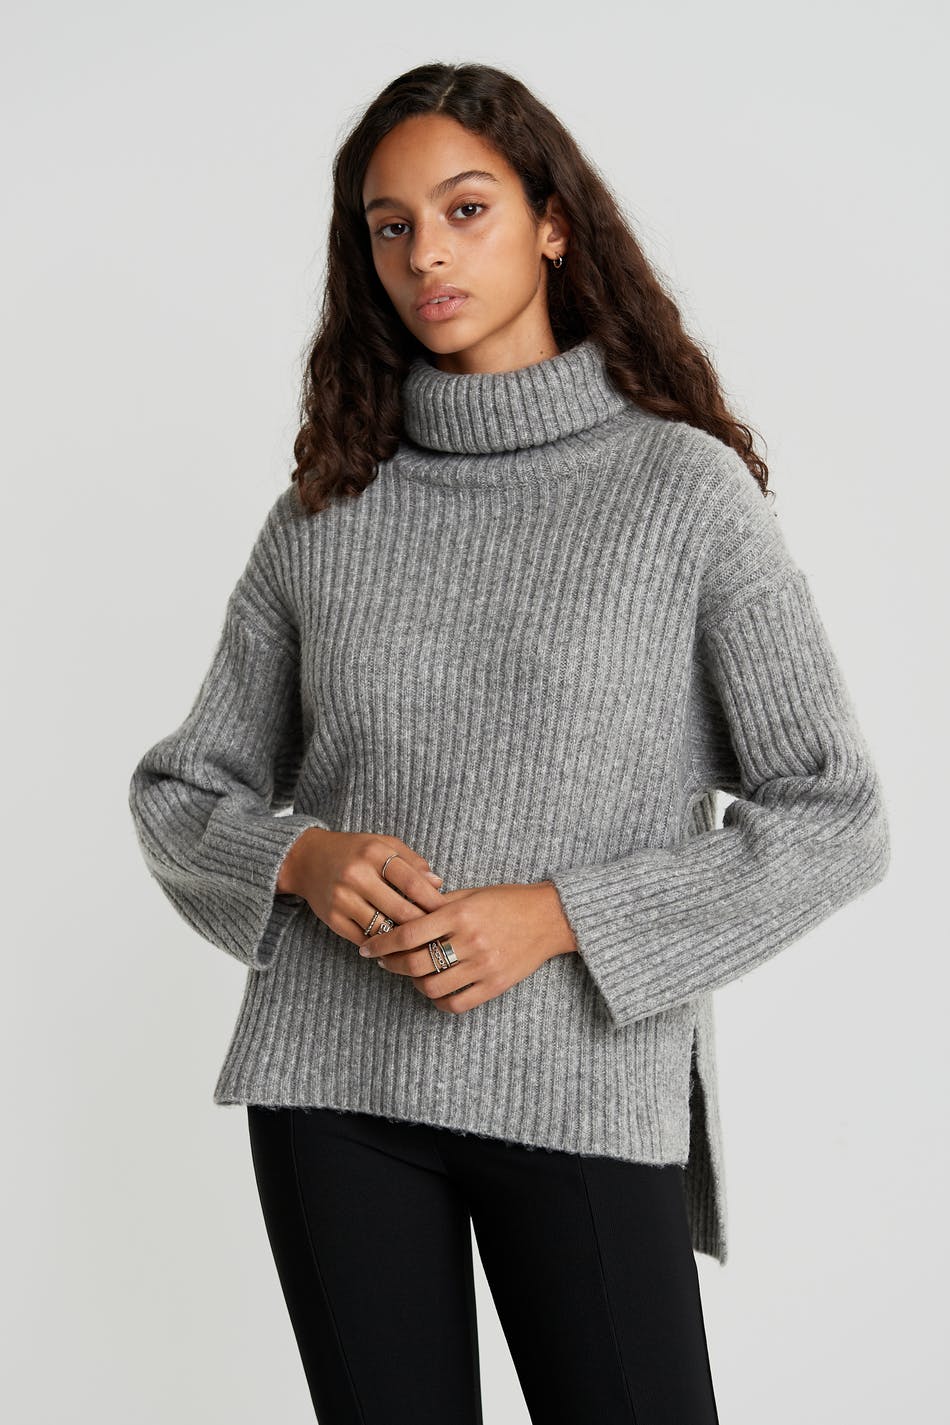 indgang forfader Rædsel Tessa knitted sweater - Gina Tricot